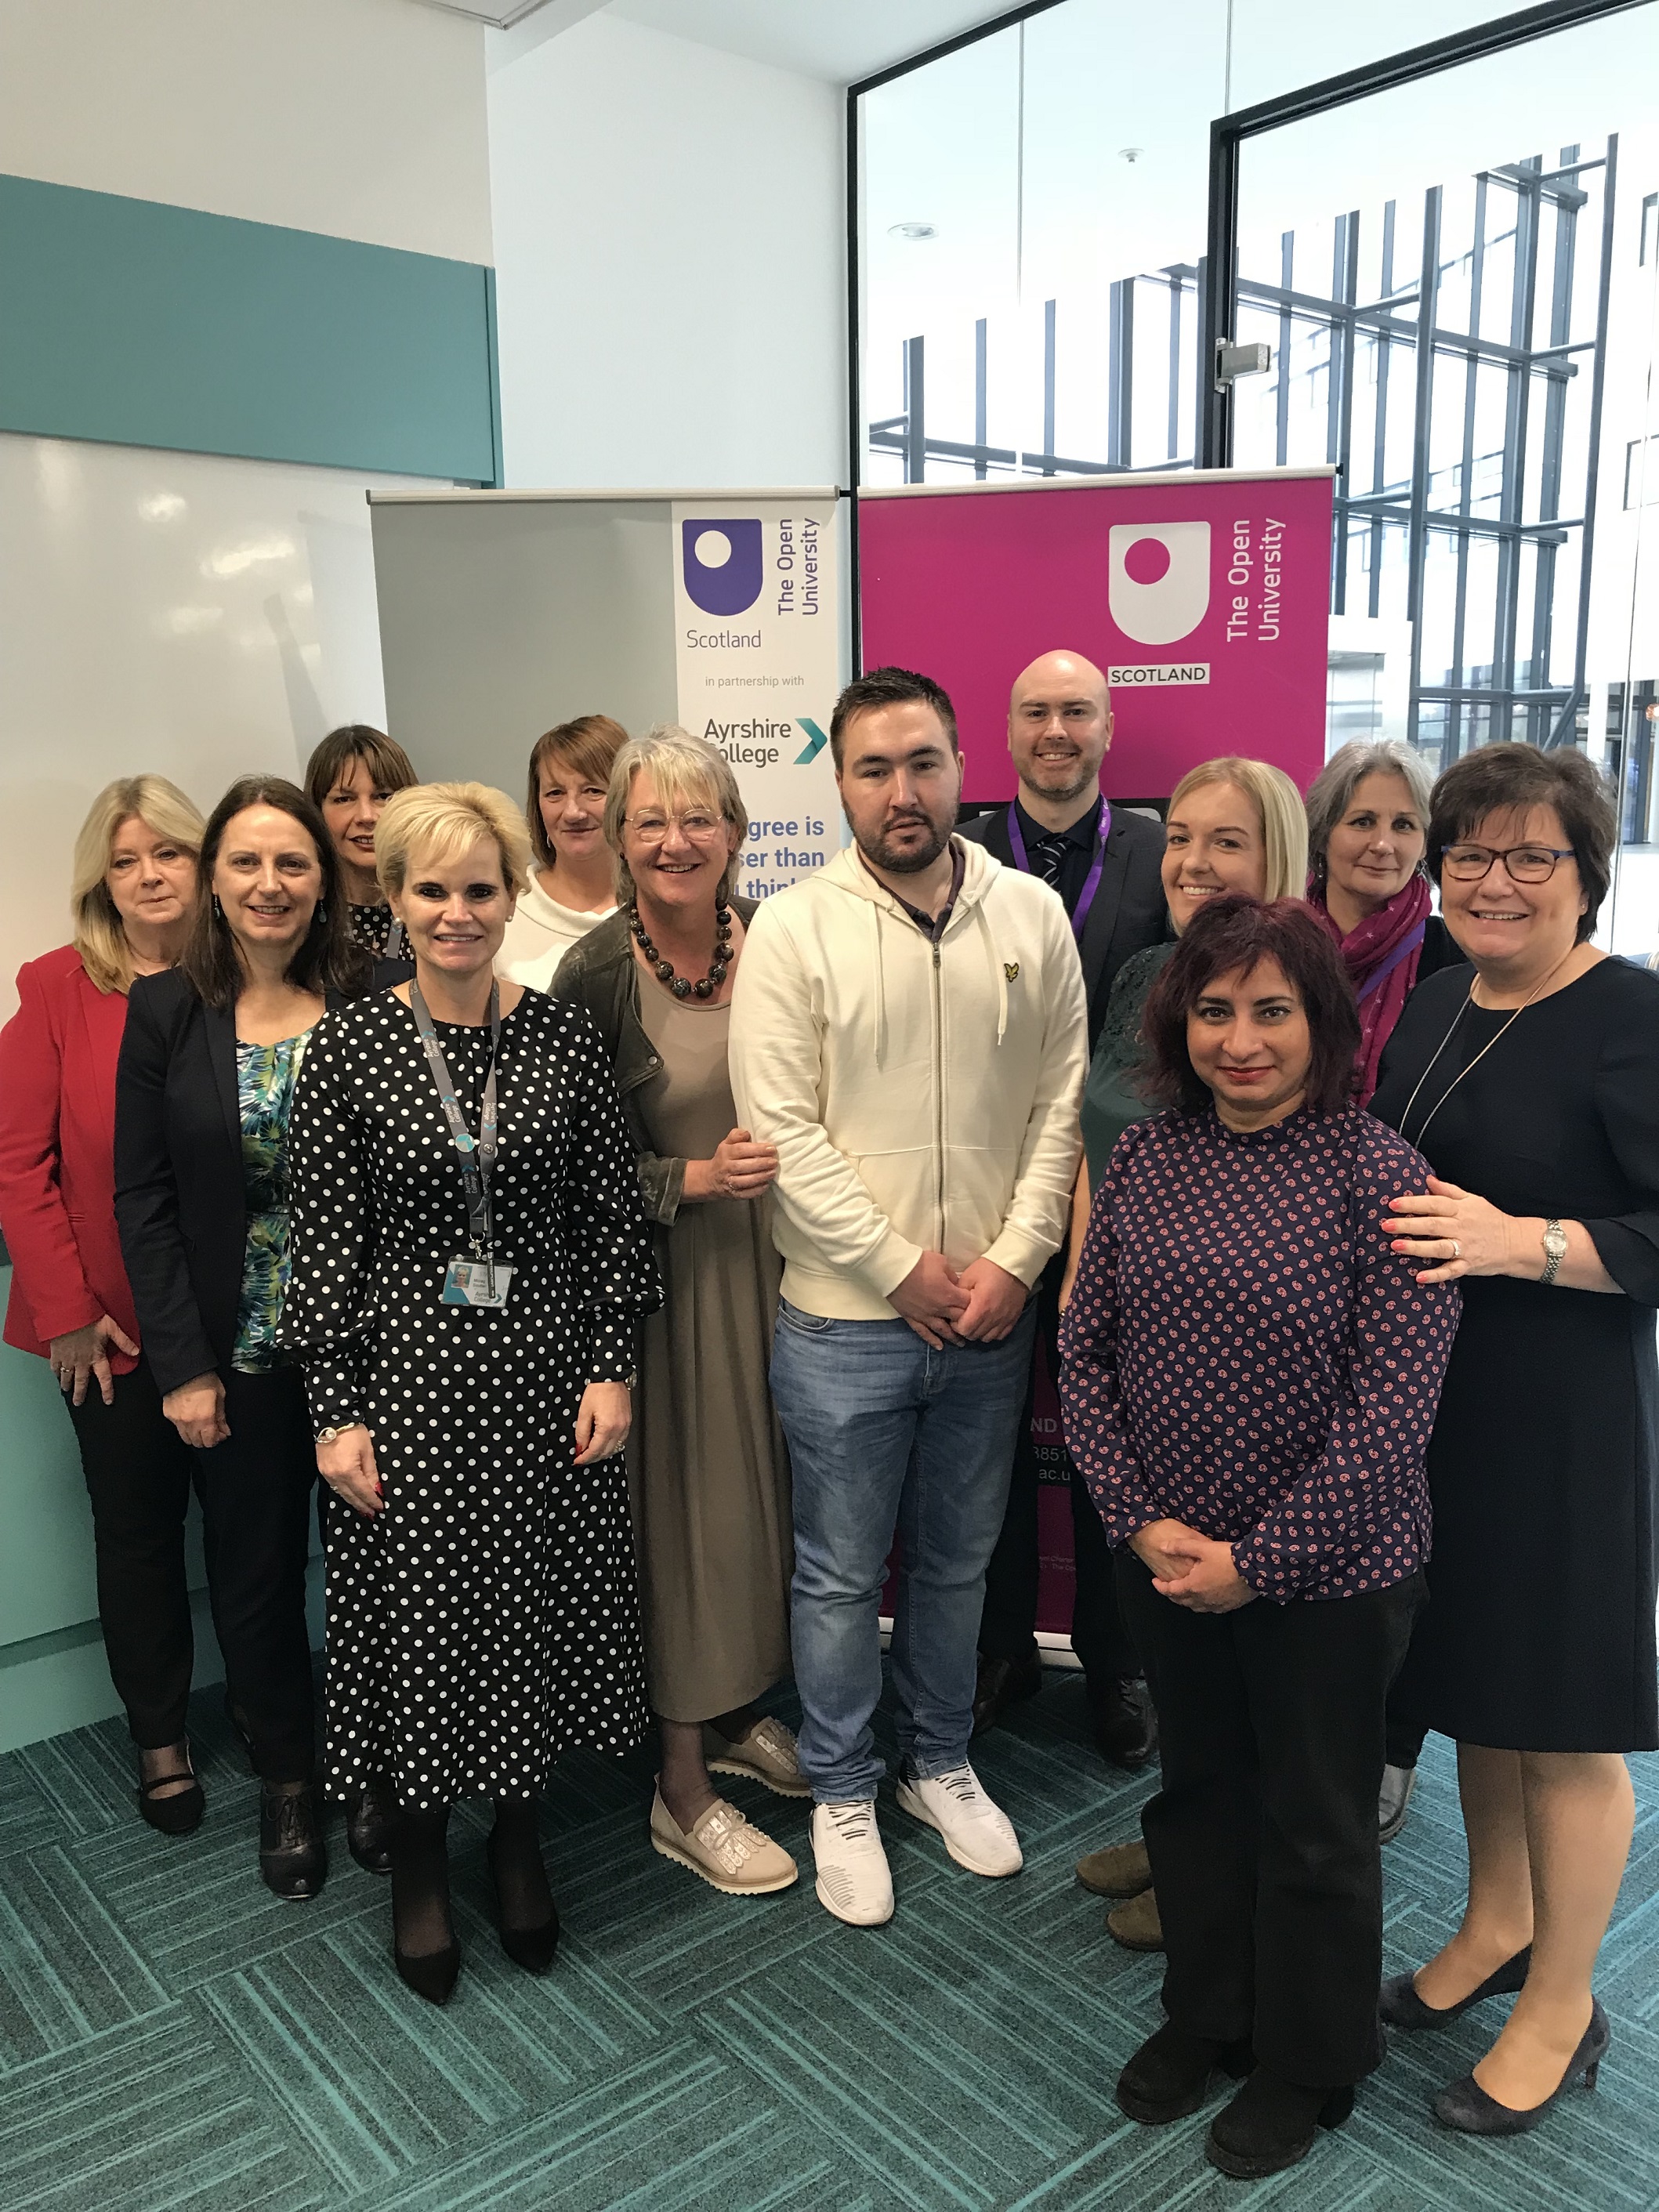 Students welcome new Transition into Social Work programme